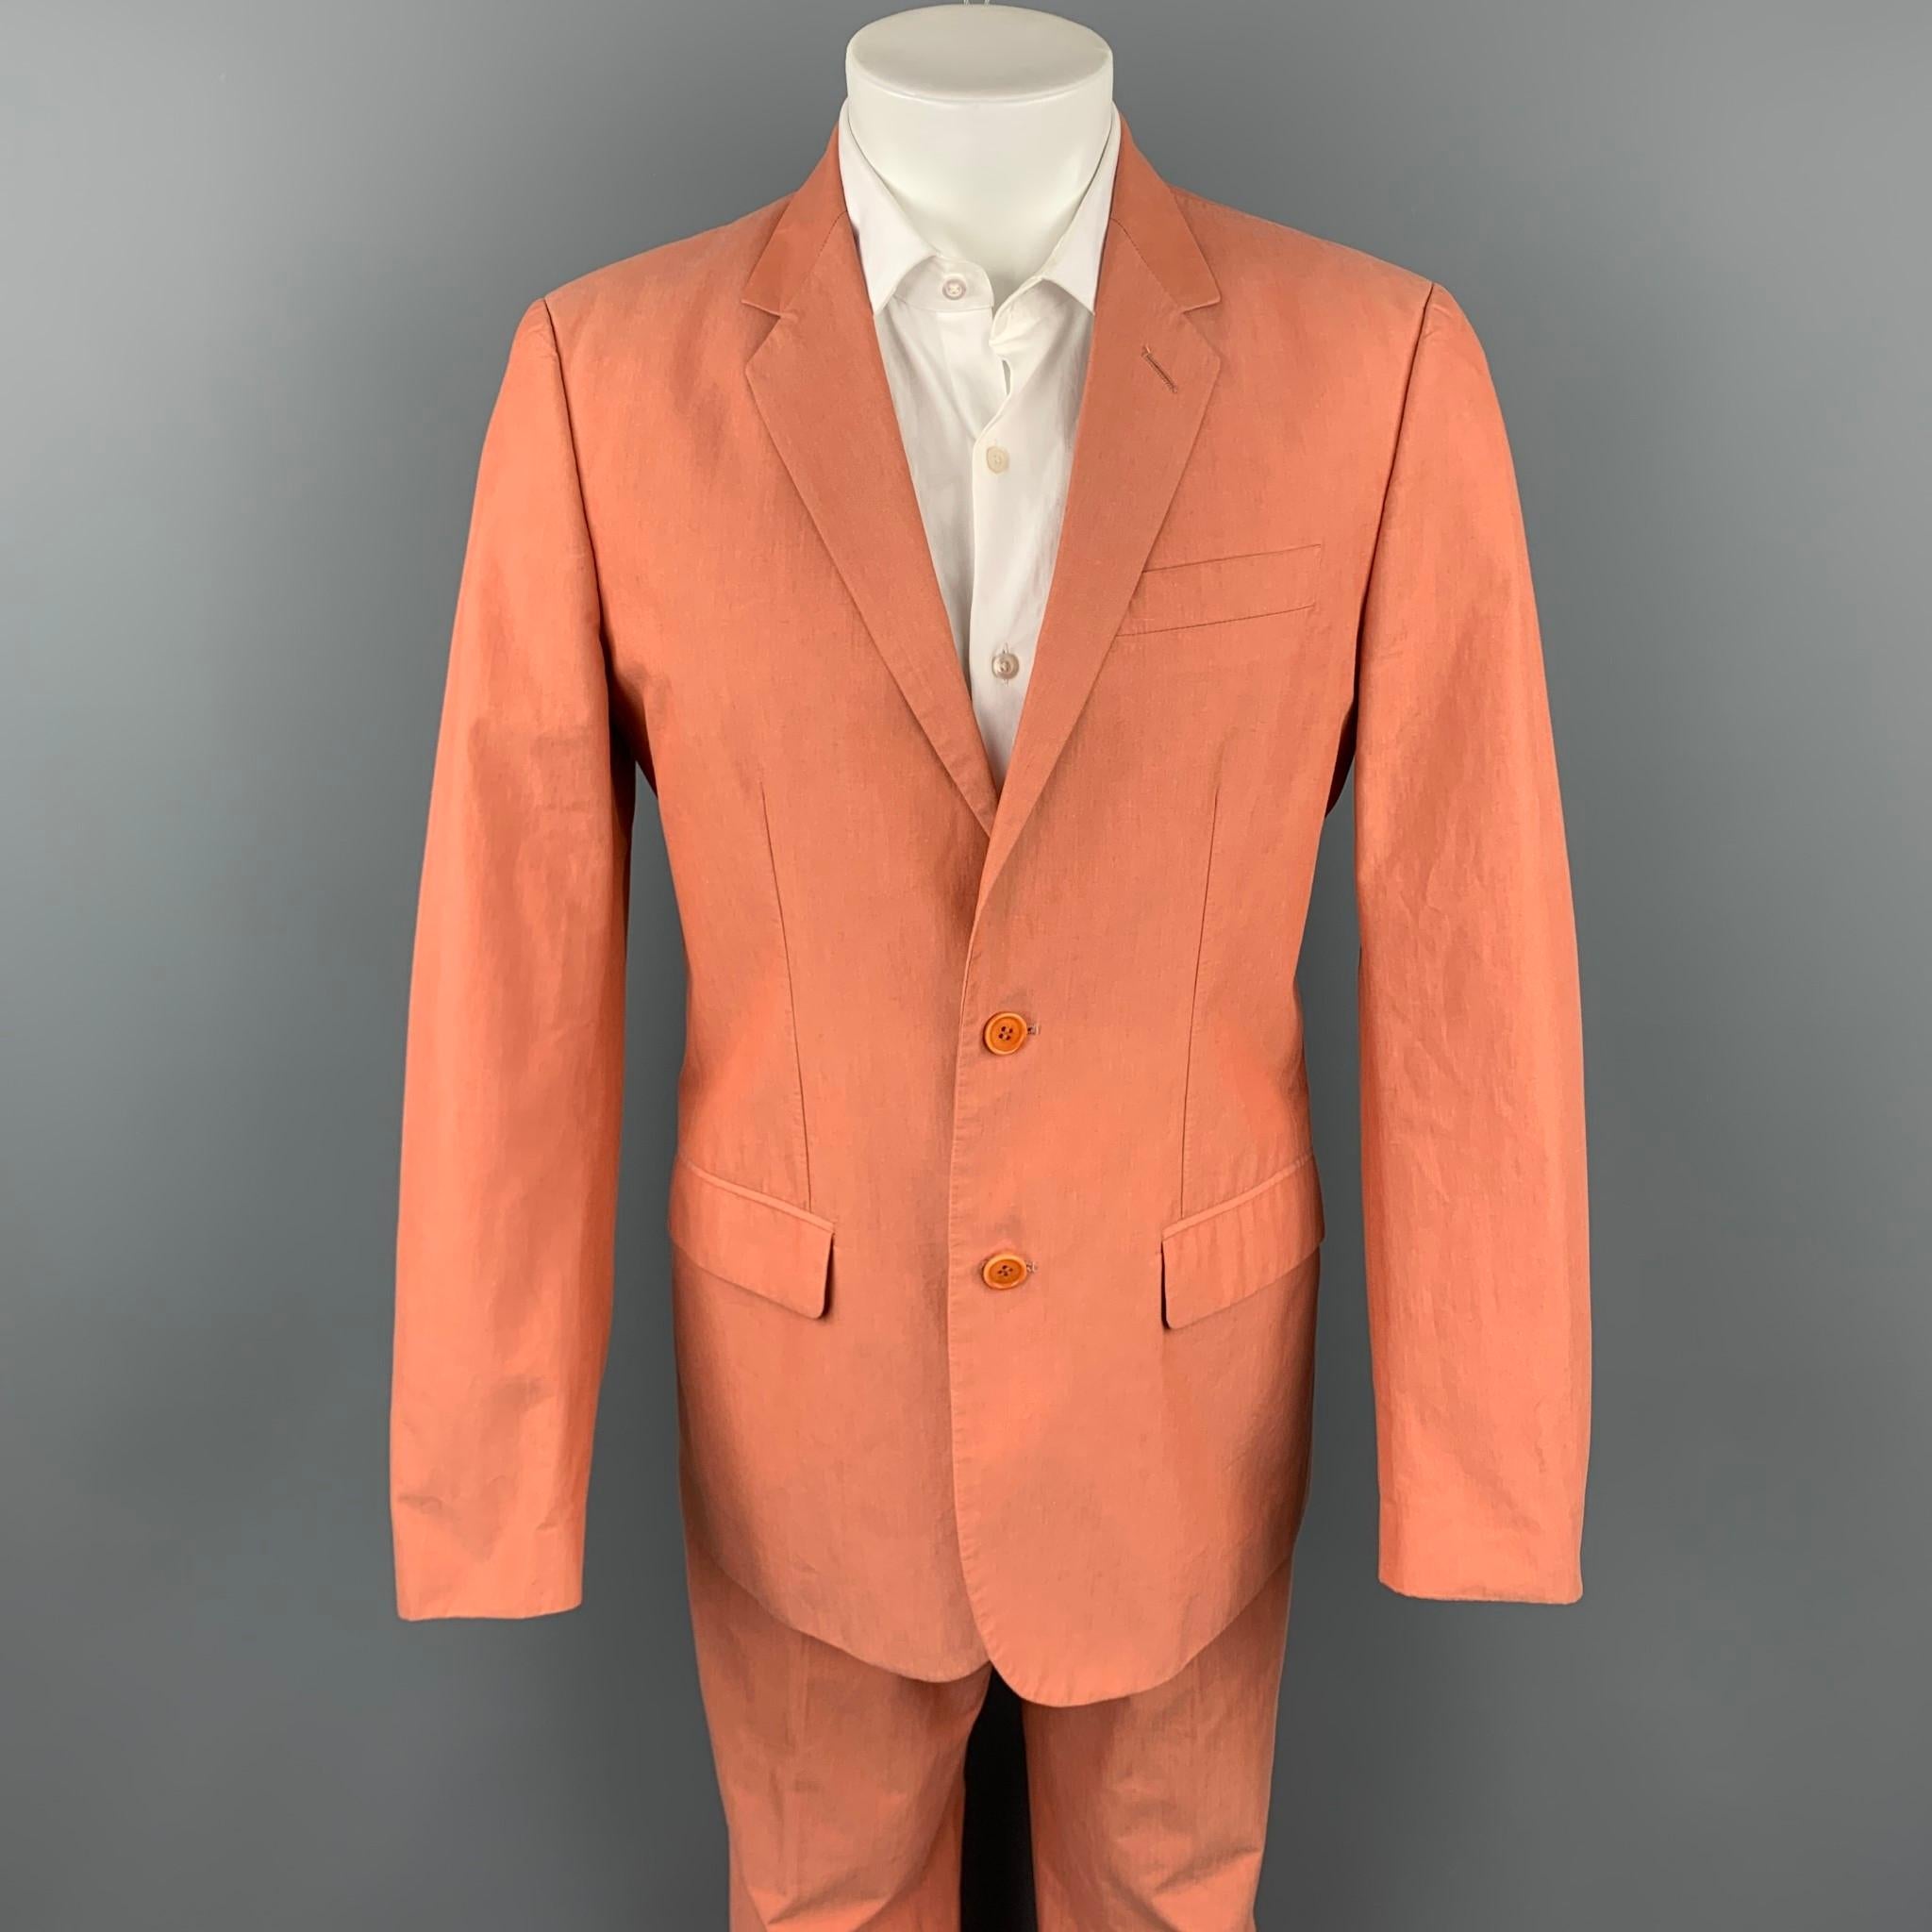 Vintage HELMUT LANG suit comes in a coral cotton with a full liner and includes a single breasted, two button sport coat with a notch lapel and matching flat front trousers. Made in Italy.

Good Pre-Owned Condition.
Marked: IT